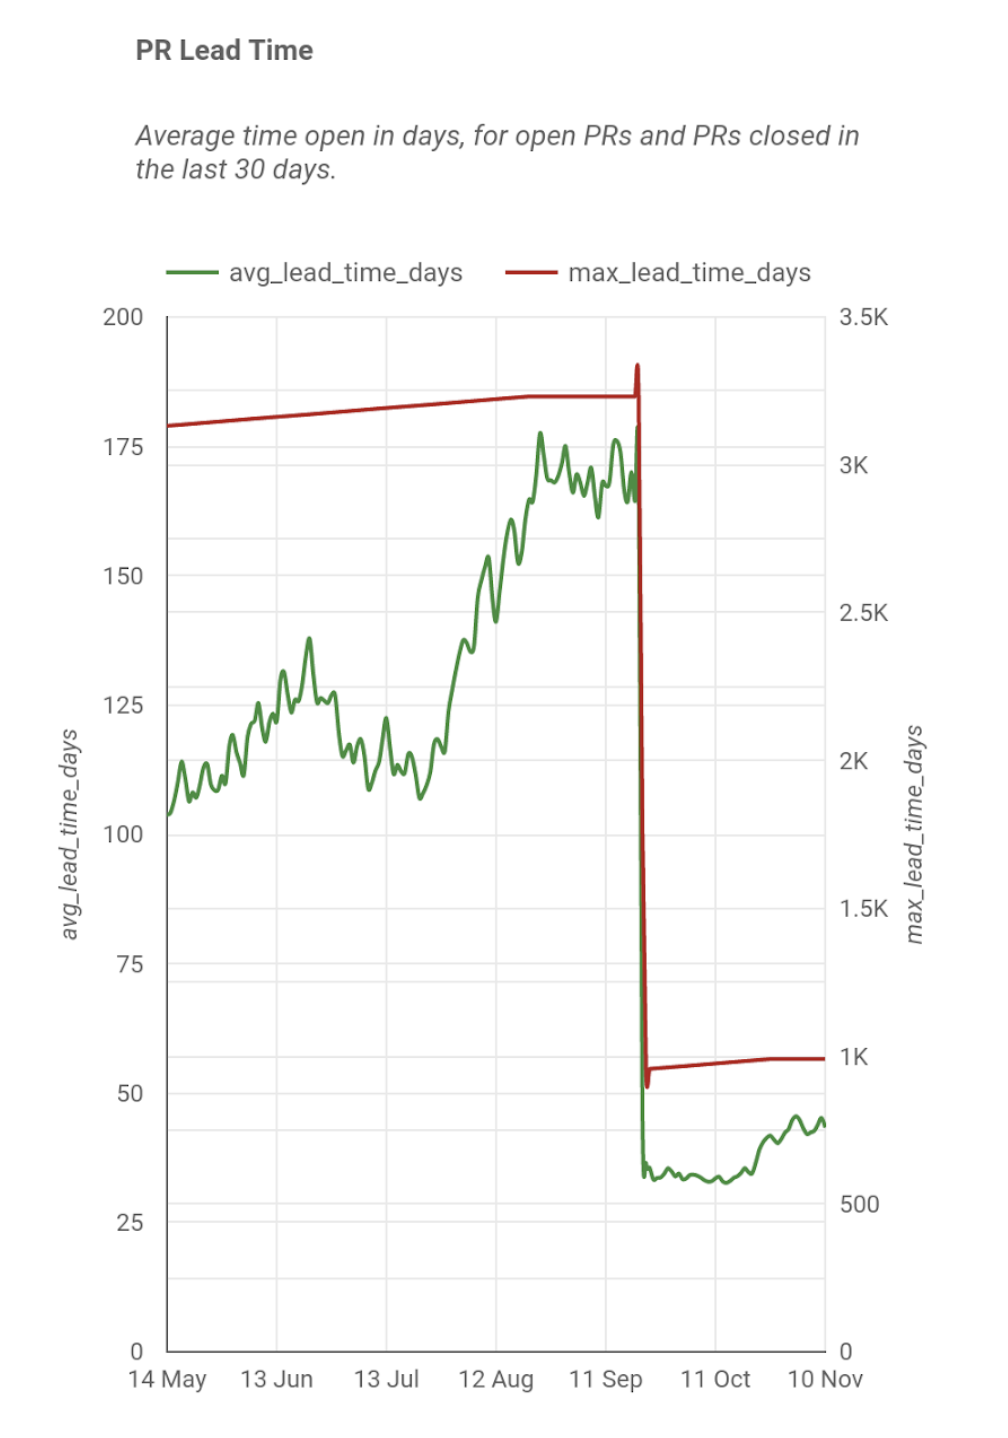 Graph showing average time open for PRs and PRs closed in 30 days